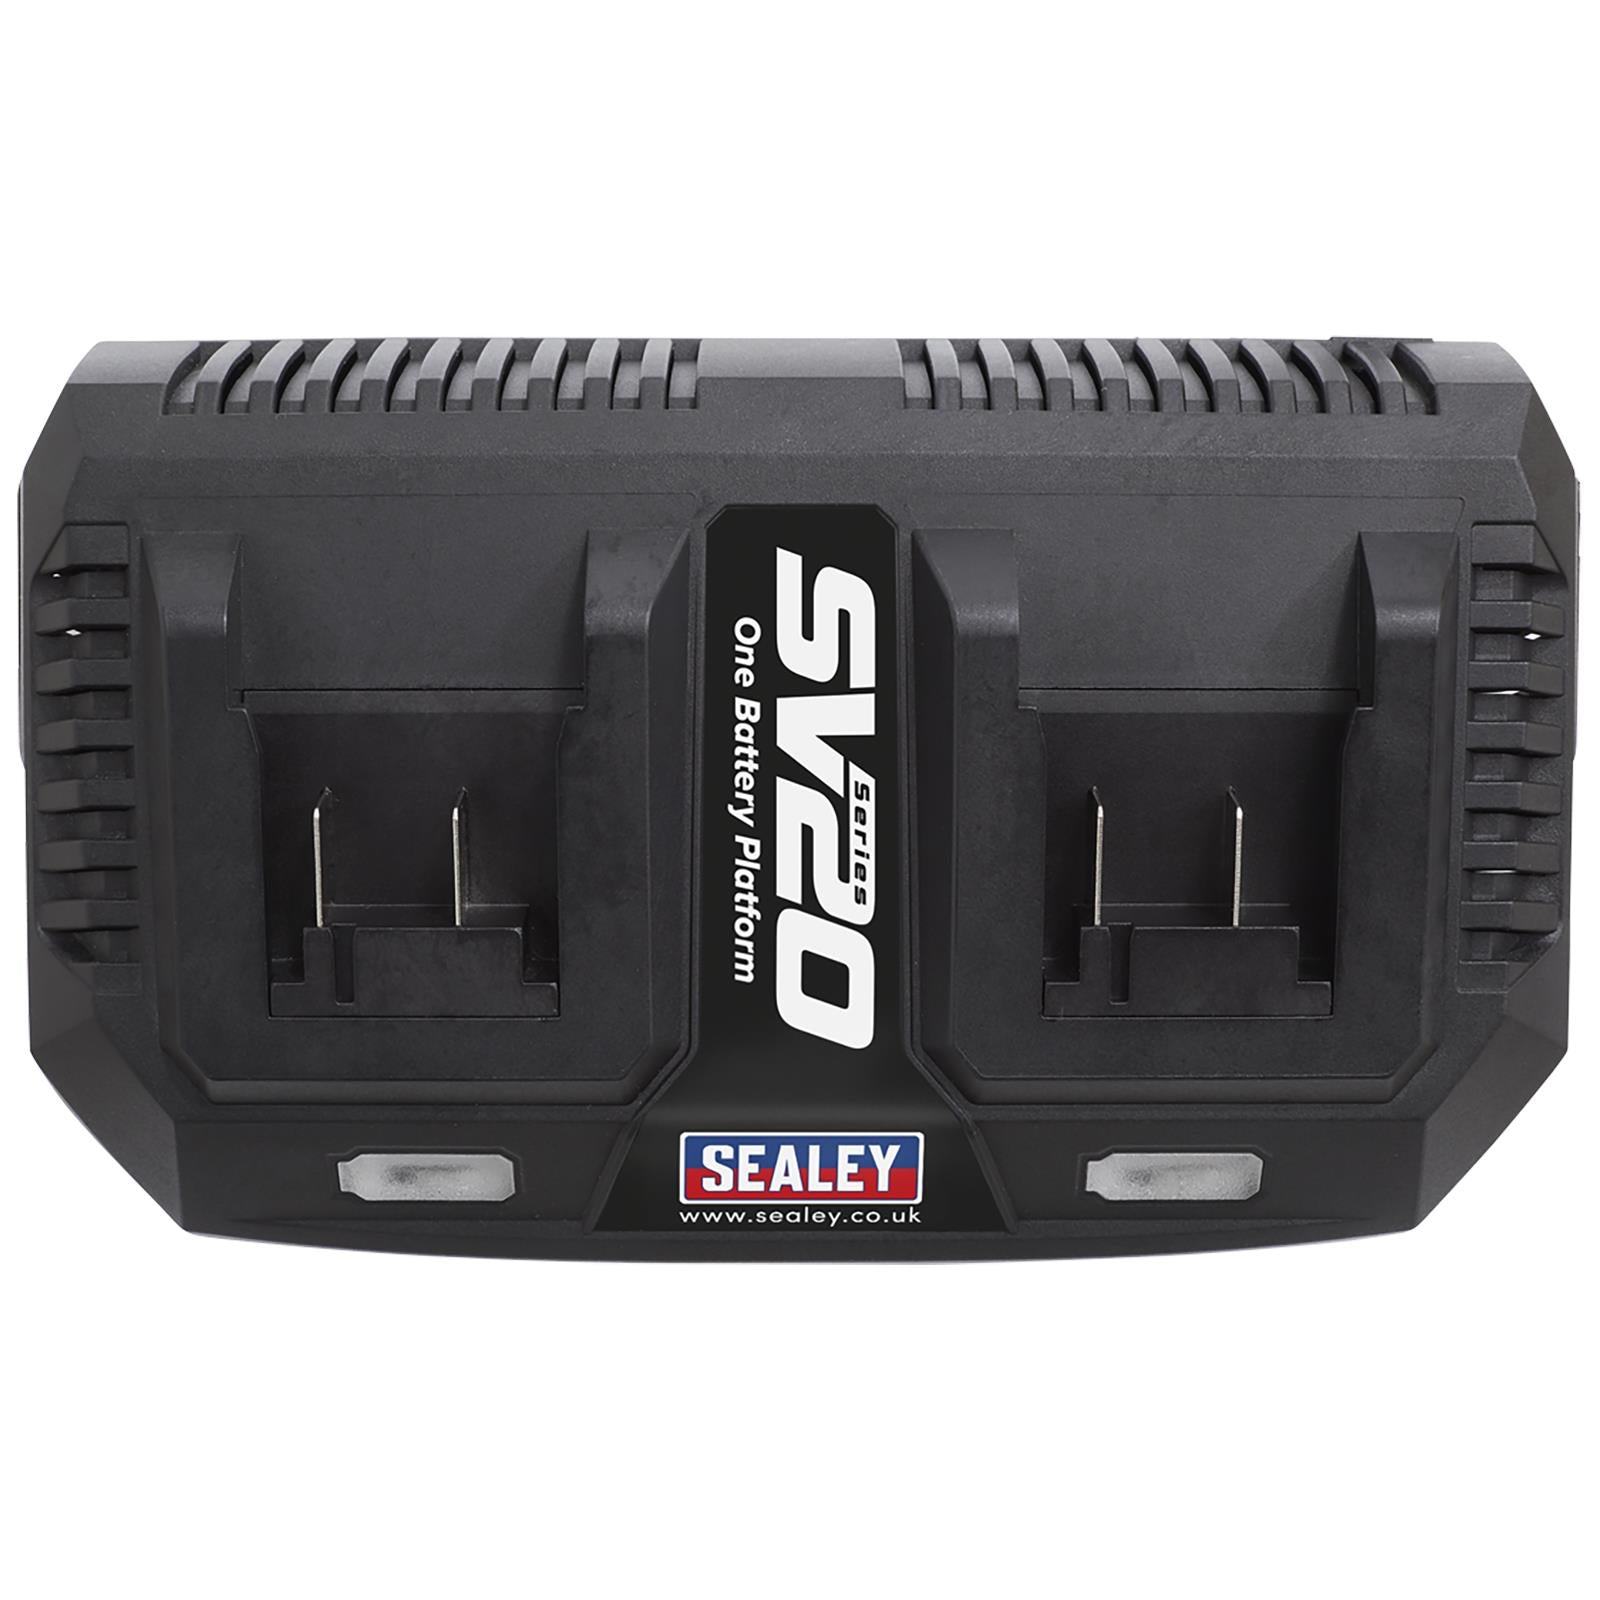 Sealey Dual Battery Charger 20V Lithium-ion for SV20 CP20V Series Cordless Power Tools